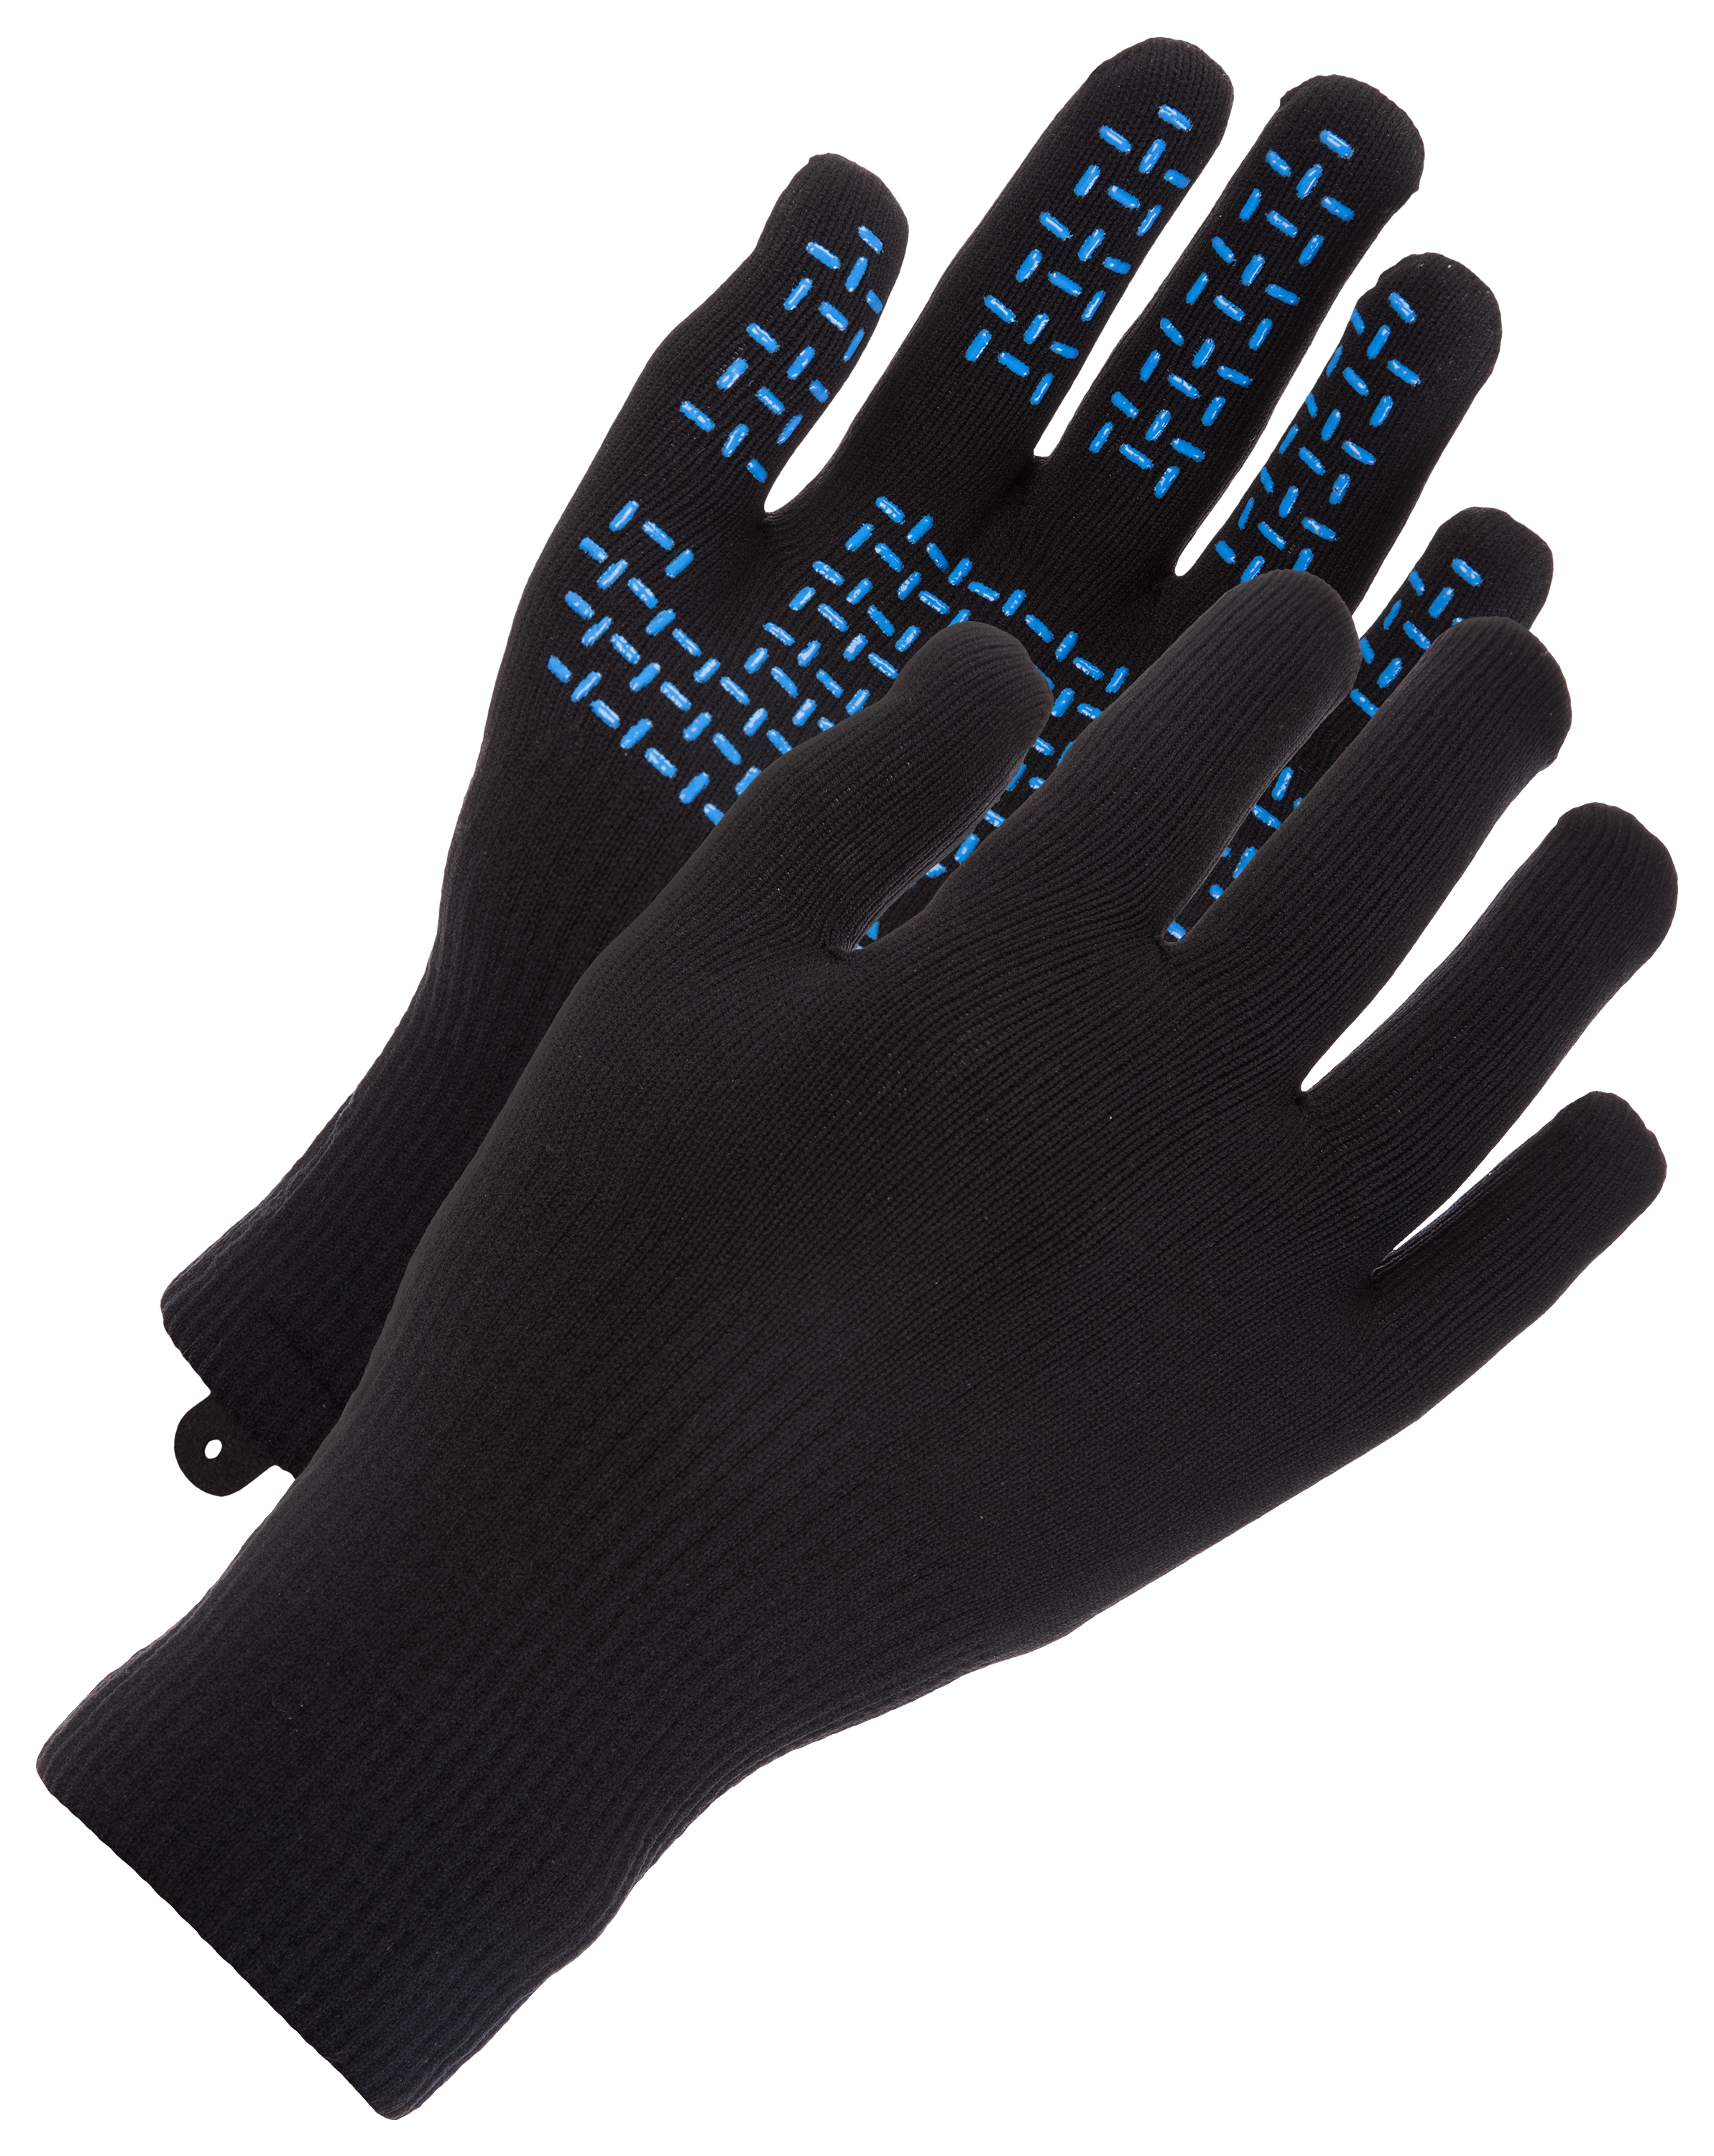 IceArmor by Clam Dry Skinz Gloves for Men